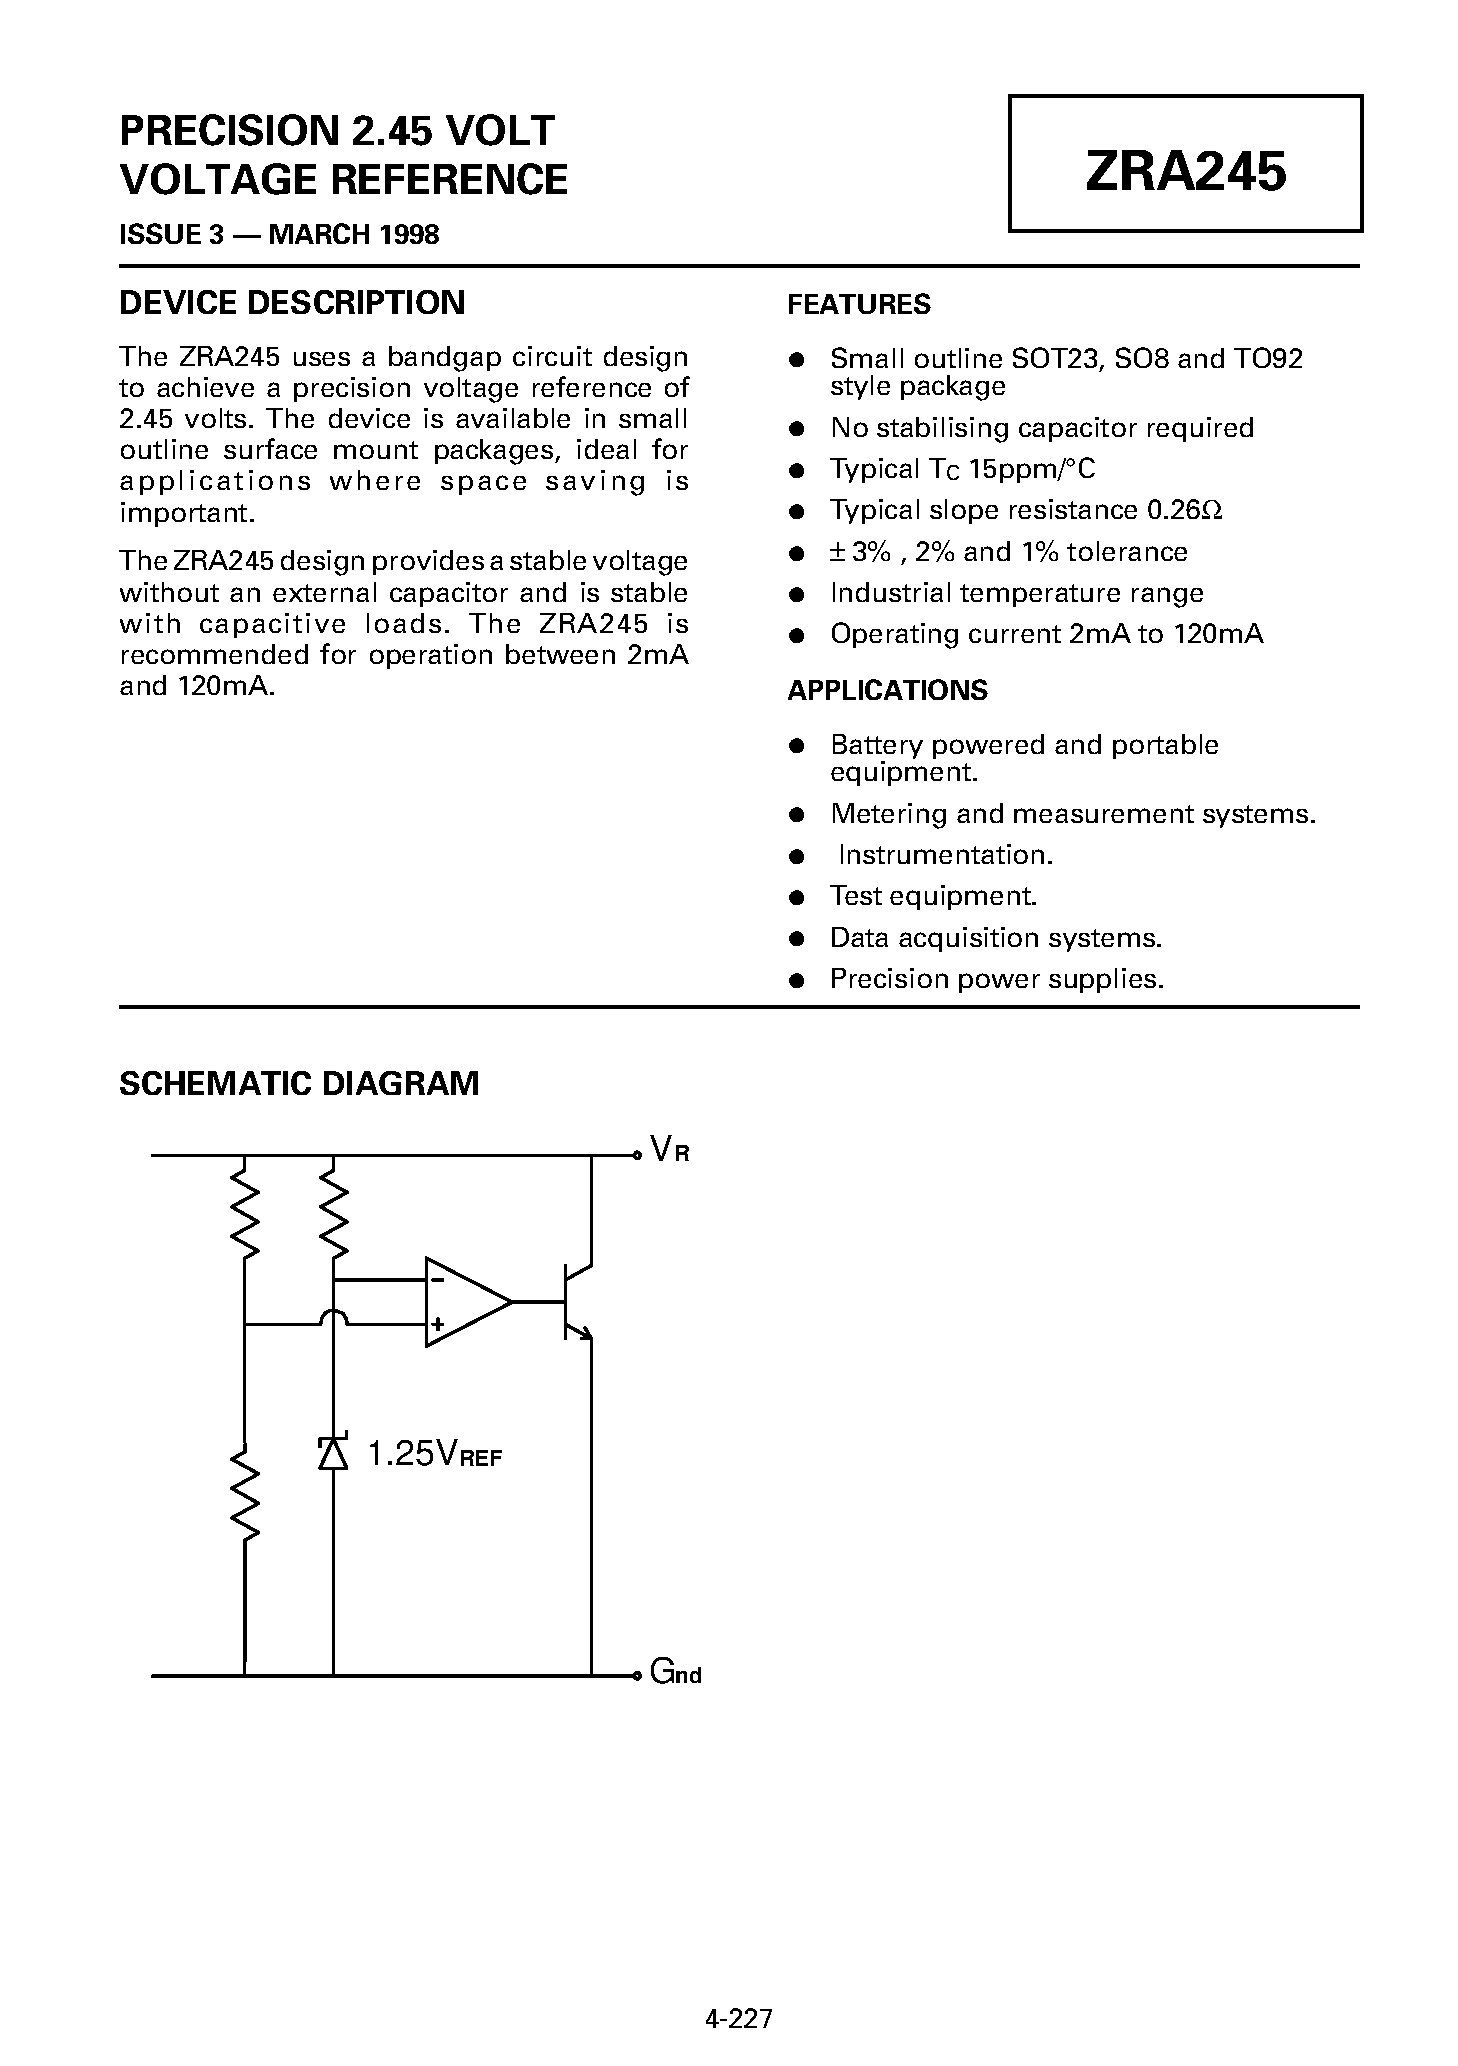 Datasheet ZRA245 - PRECISION 2.45 VOLT VOLTAGE REFERENCE page 1